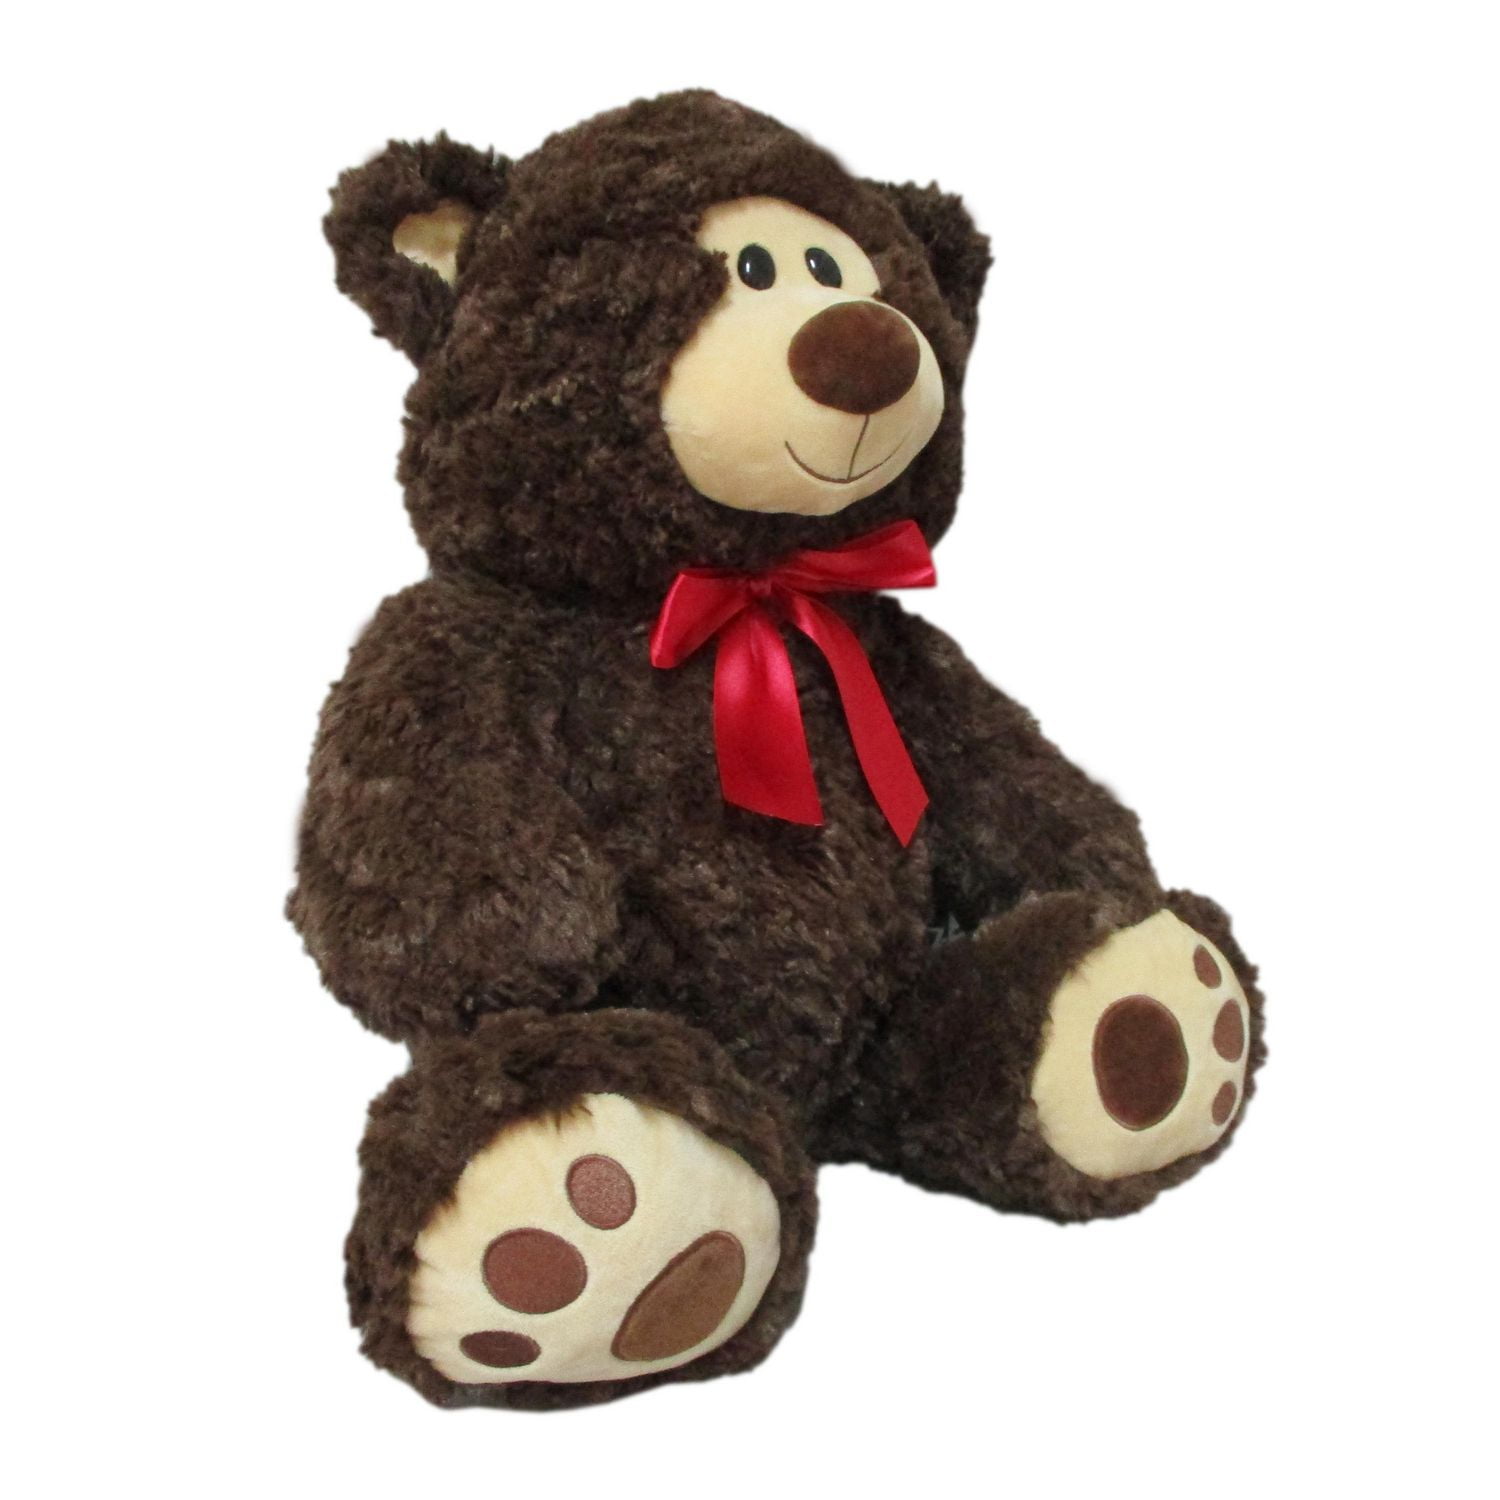 Kid Connection Holiday Teddy, 18 Plush Teddy, ages 3+ 